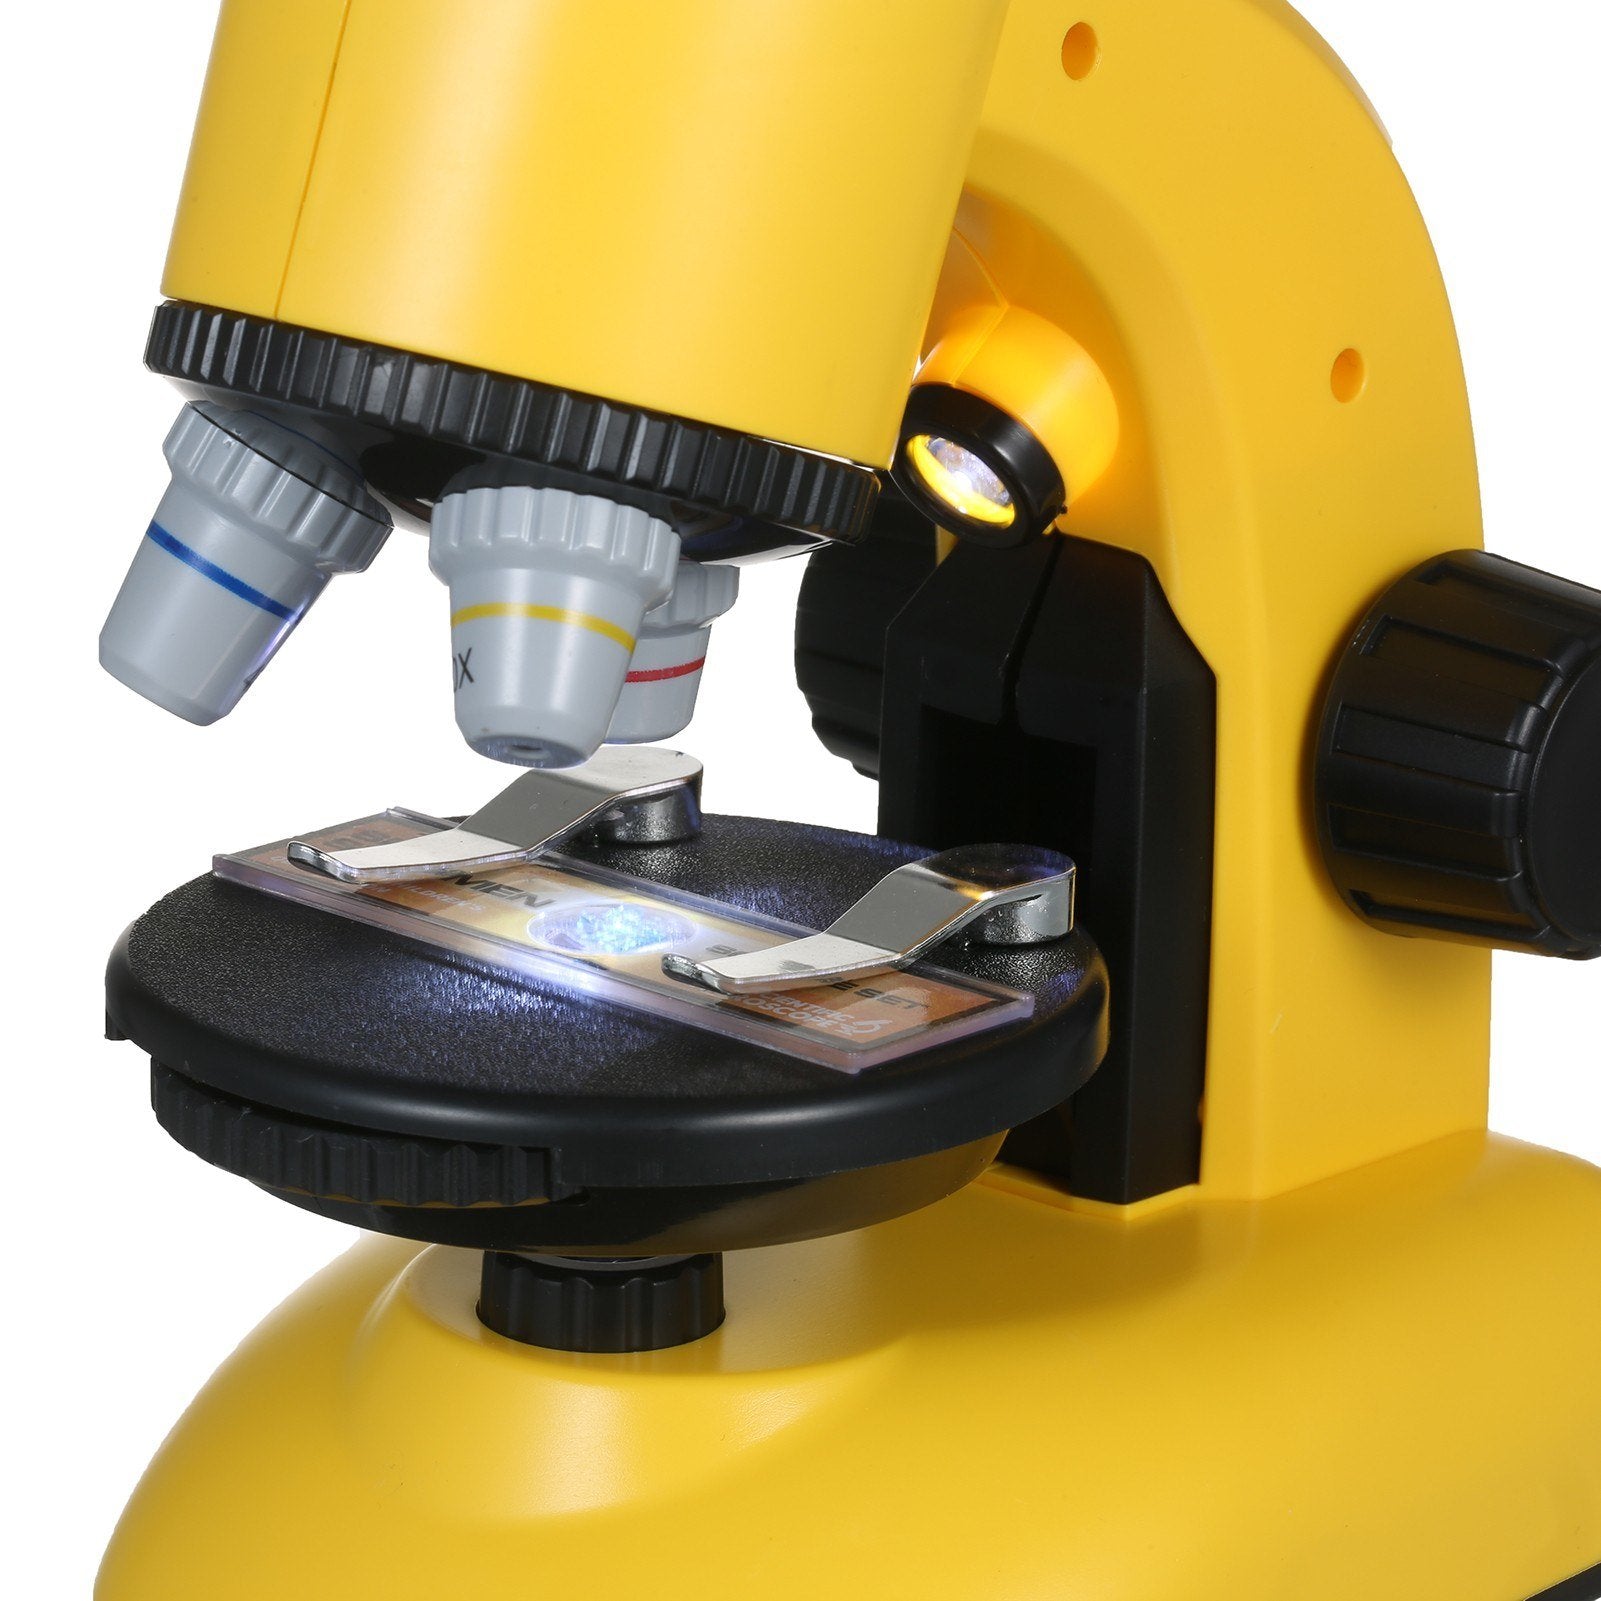 Kids Microscope Objects and Specimen Observation Magnification with Battery LED Light